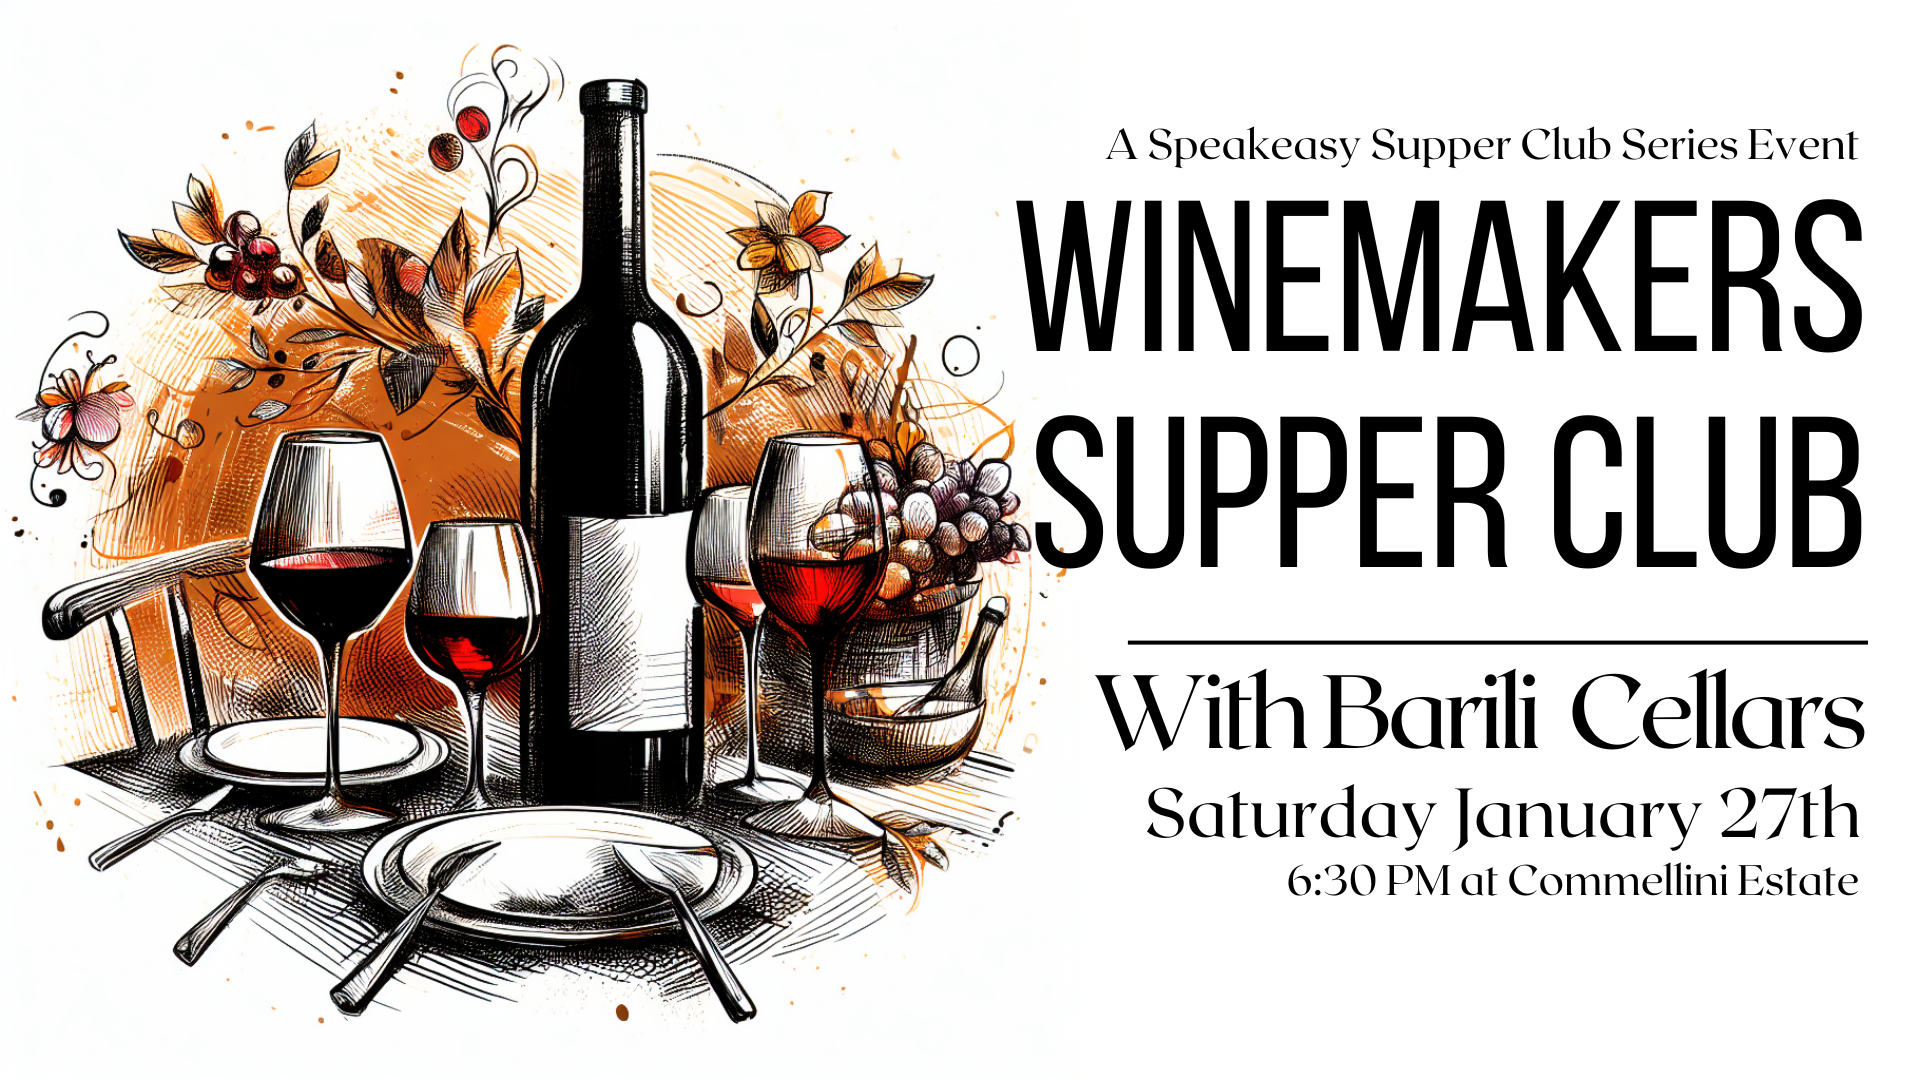 Winemakers Supper Club with Barili Cellars